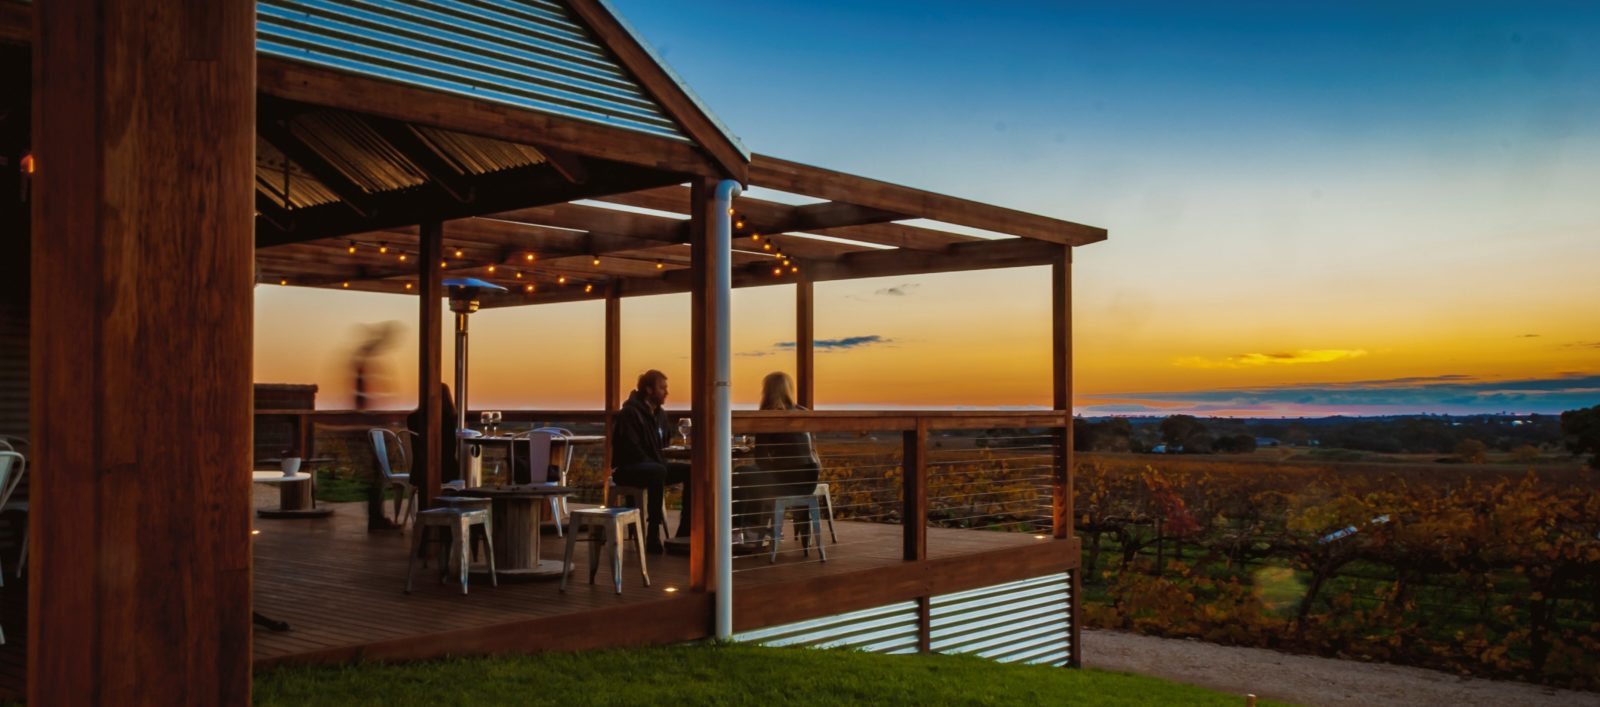 sunset views on the deck overlooking the vineyard